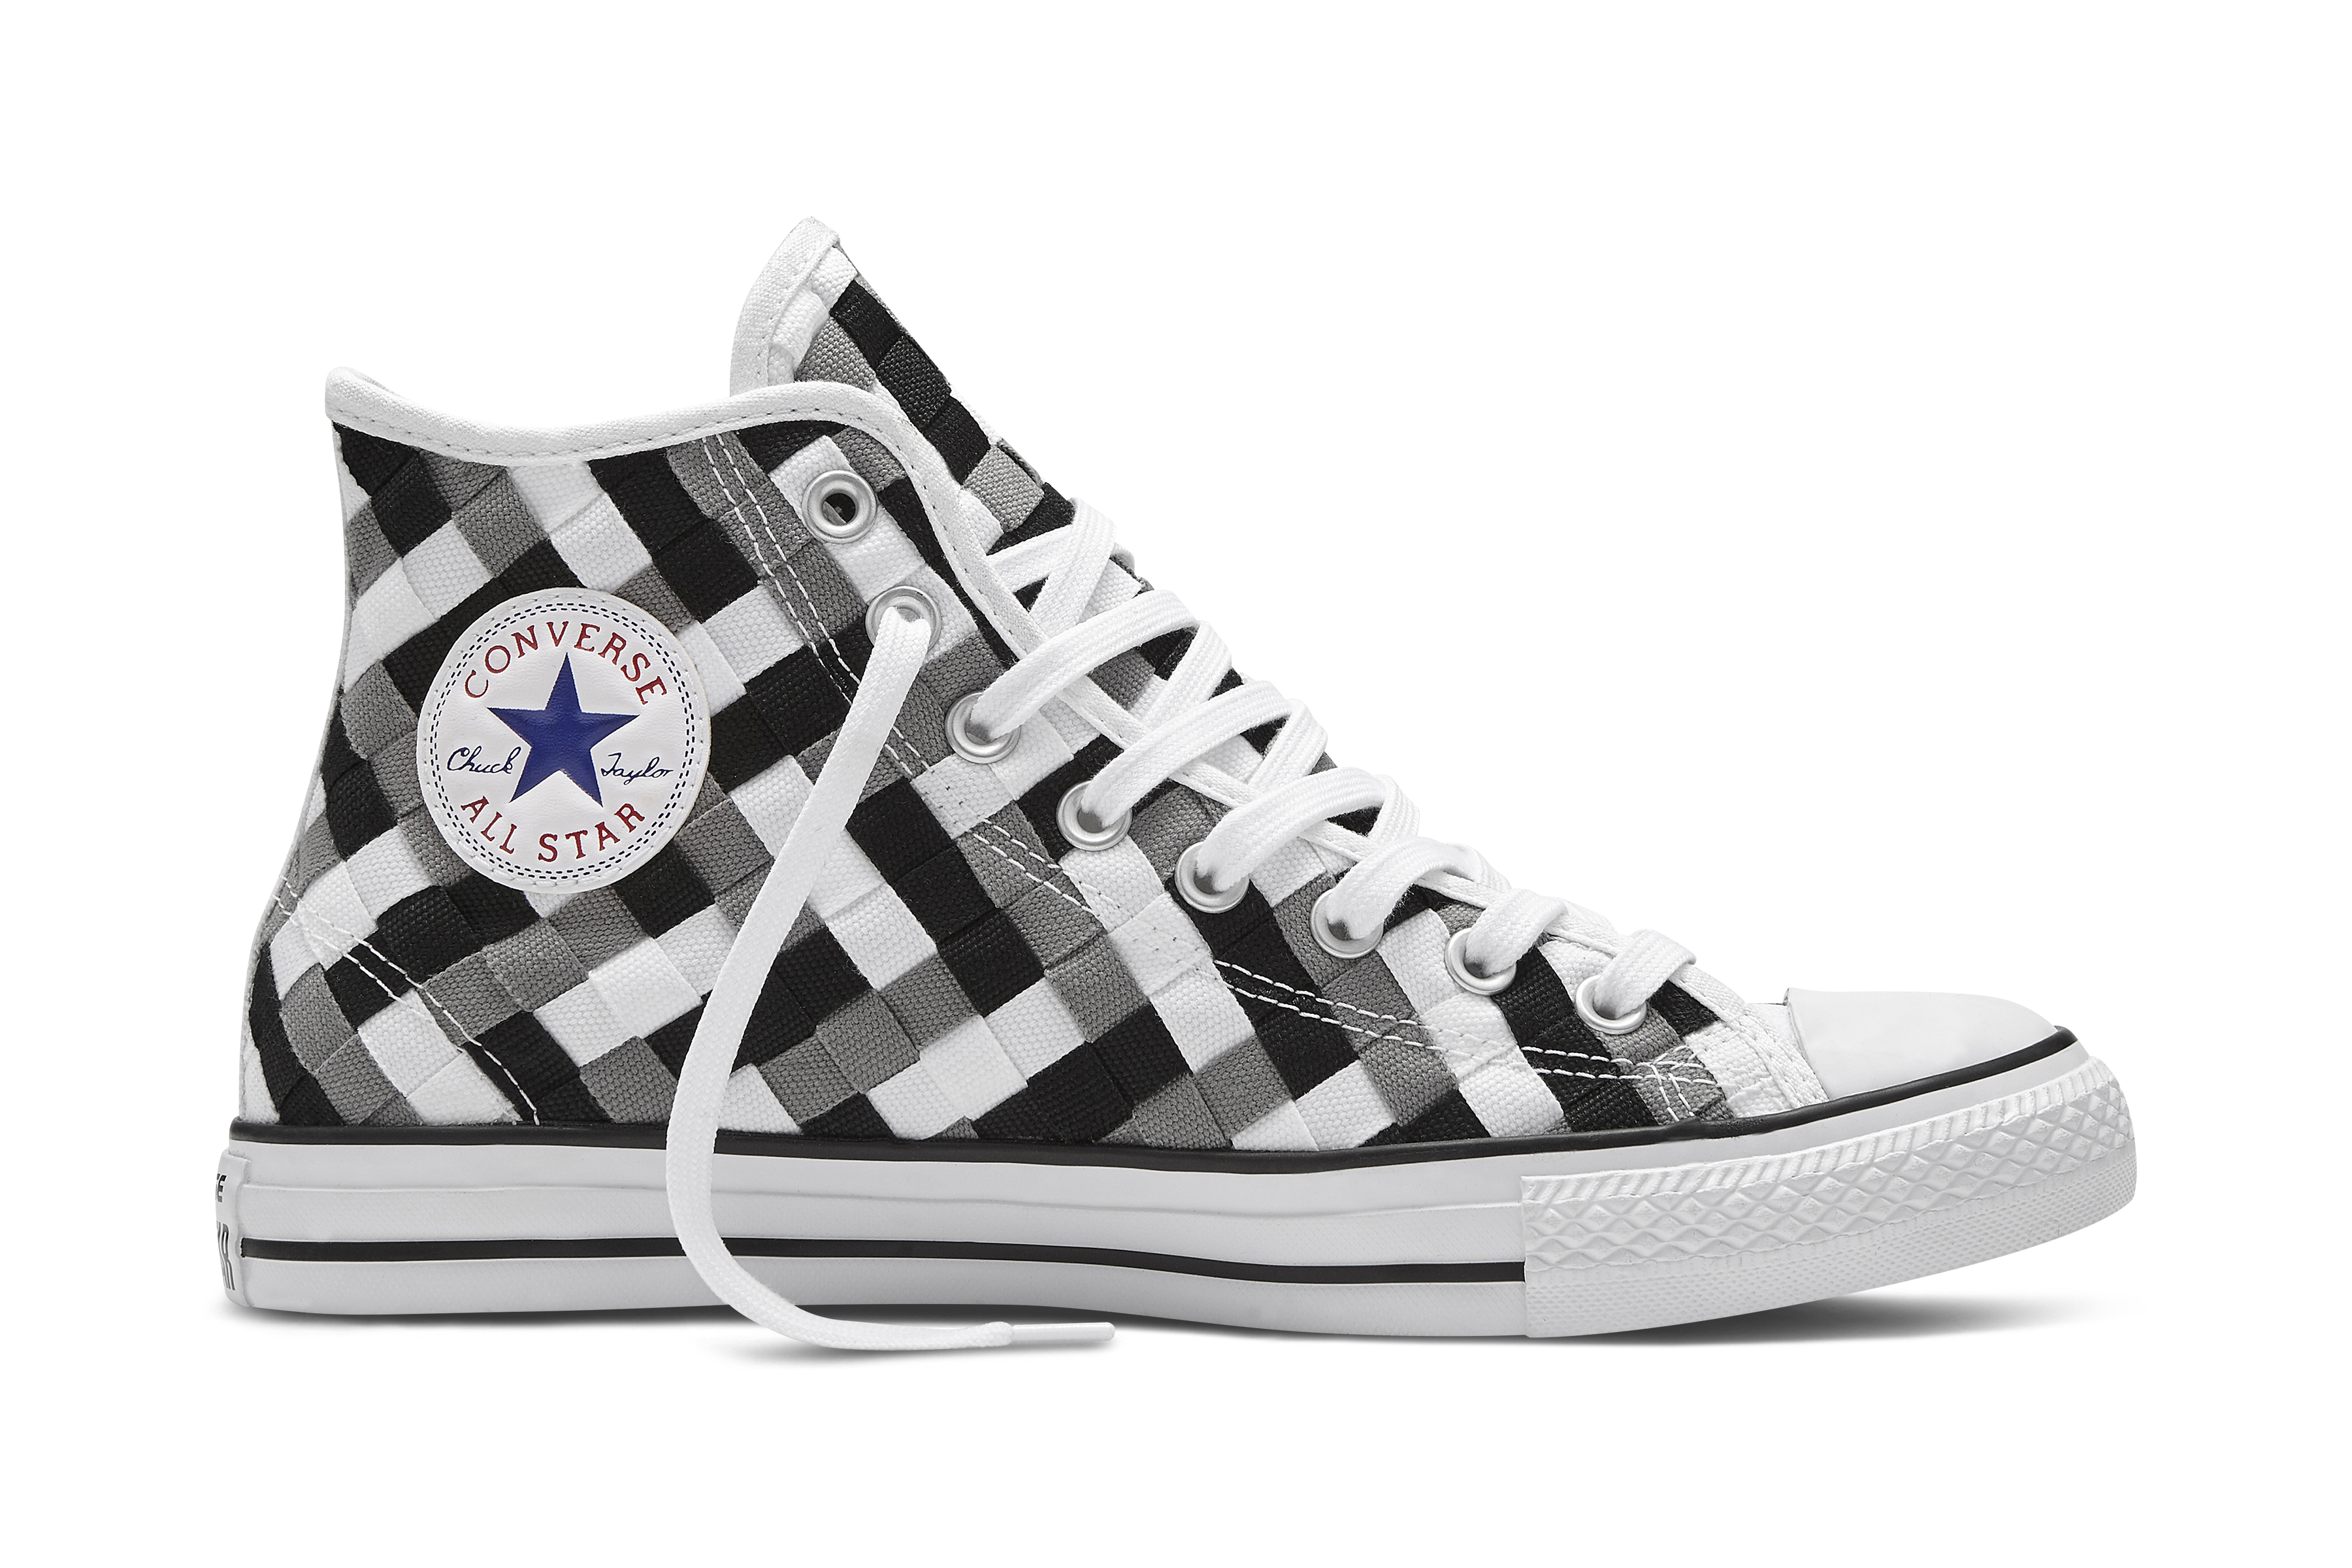 Converse Introduce The Woven Collection